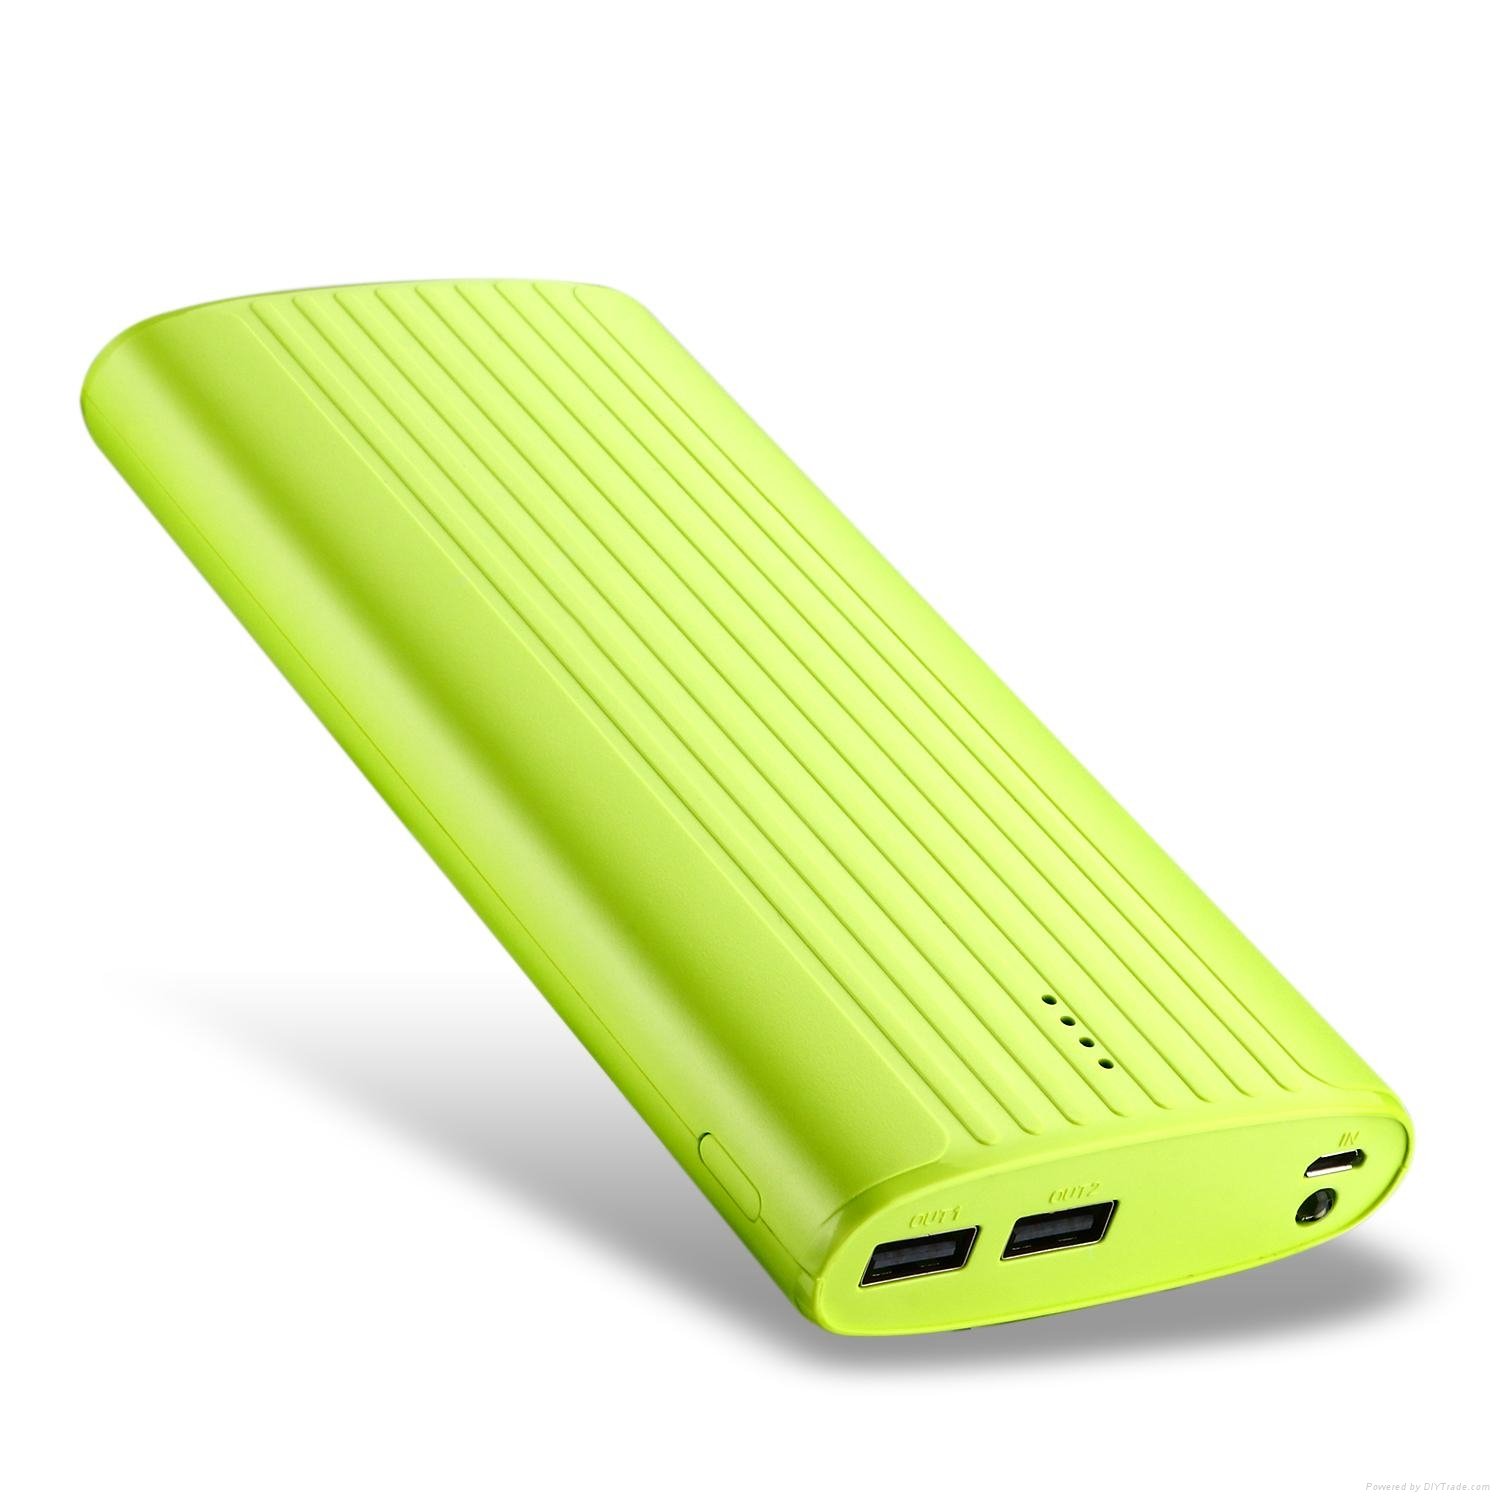 Dual ports power bank charger for iPhone6 3